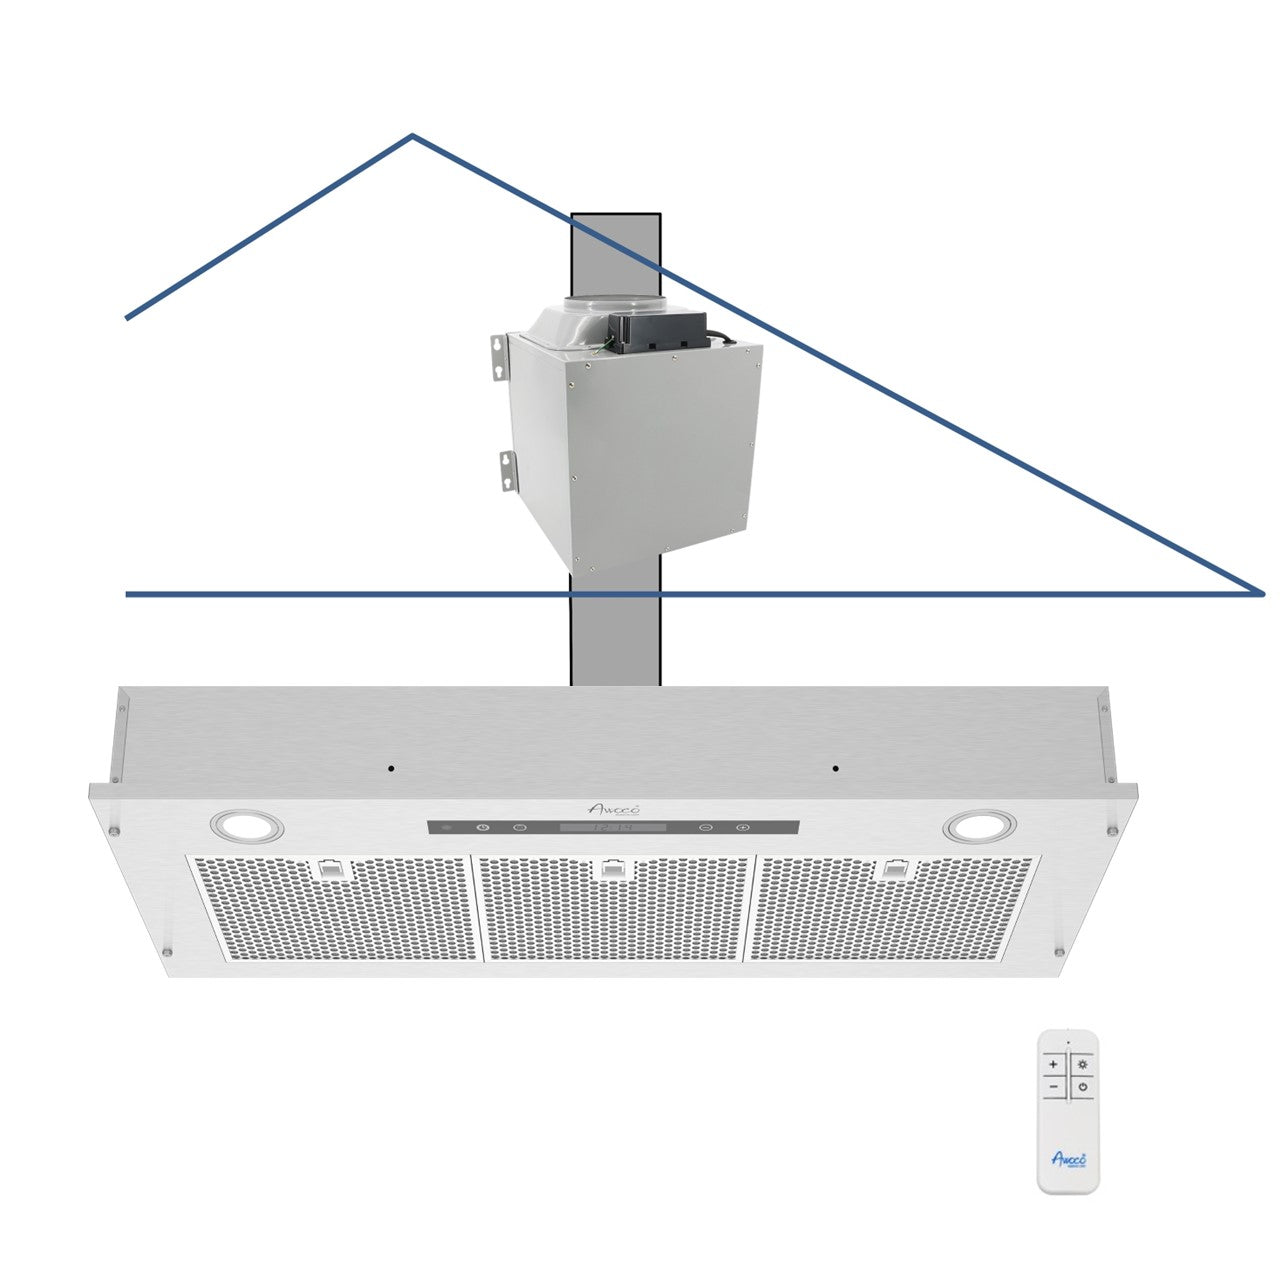 Awoco RH-IT08-R36 14-1/2”D Super Quiet Split Insert Ceiling Mount Stainless Steel Range Hood, 4-Speed, 1000 CFM, LED Lights with 8” Blower & Remote Control (36"W 8" Vent)